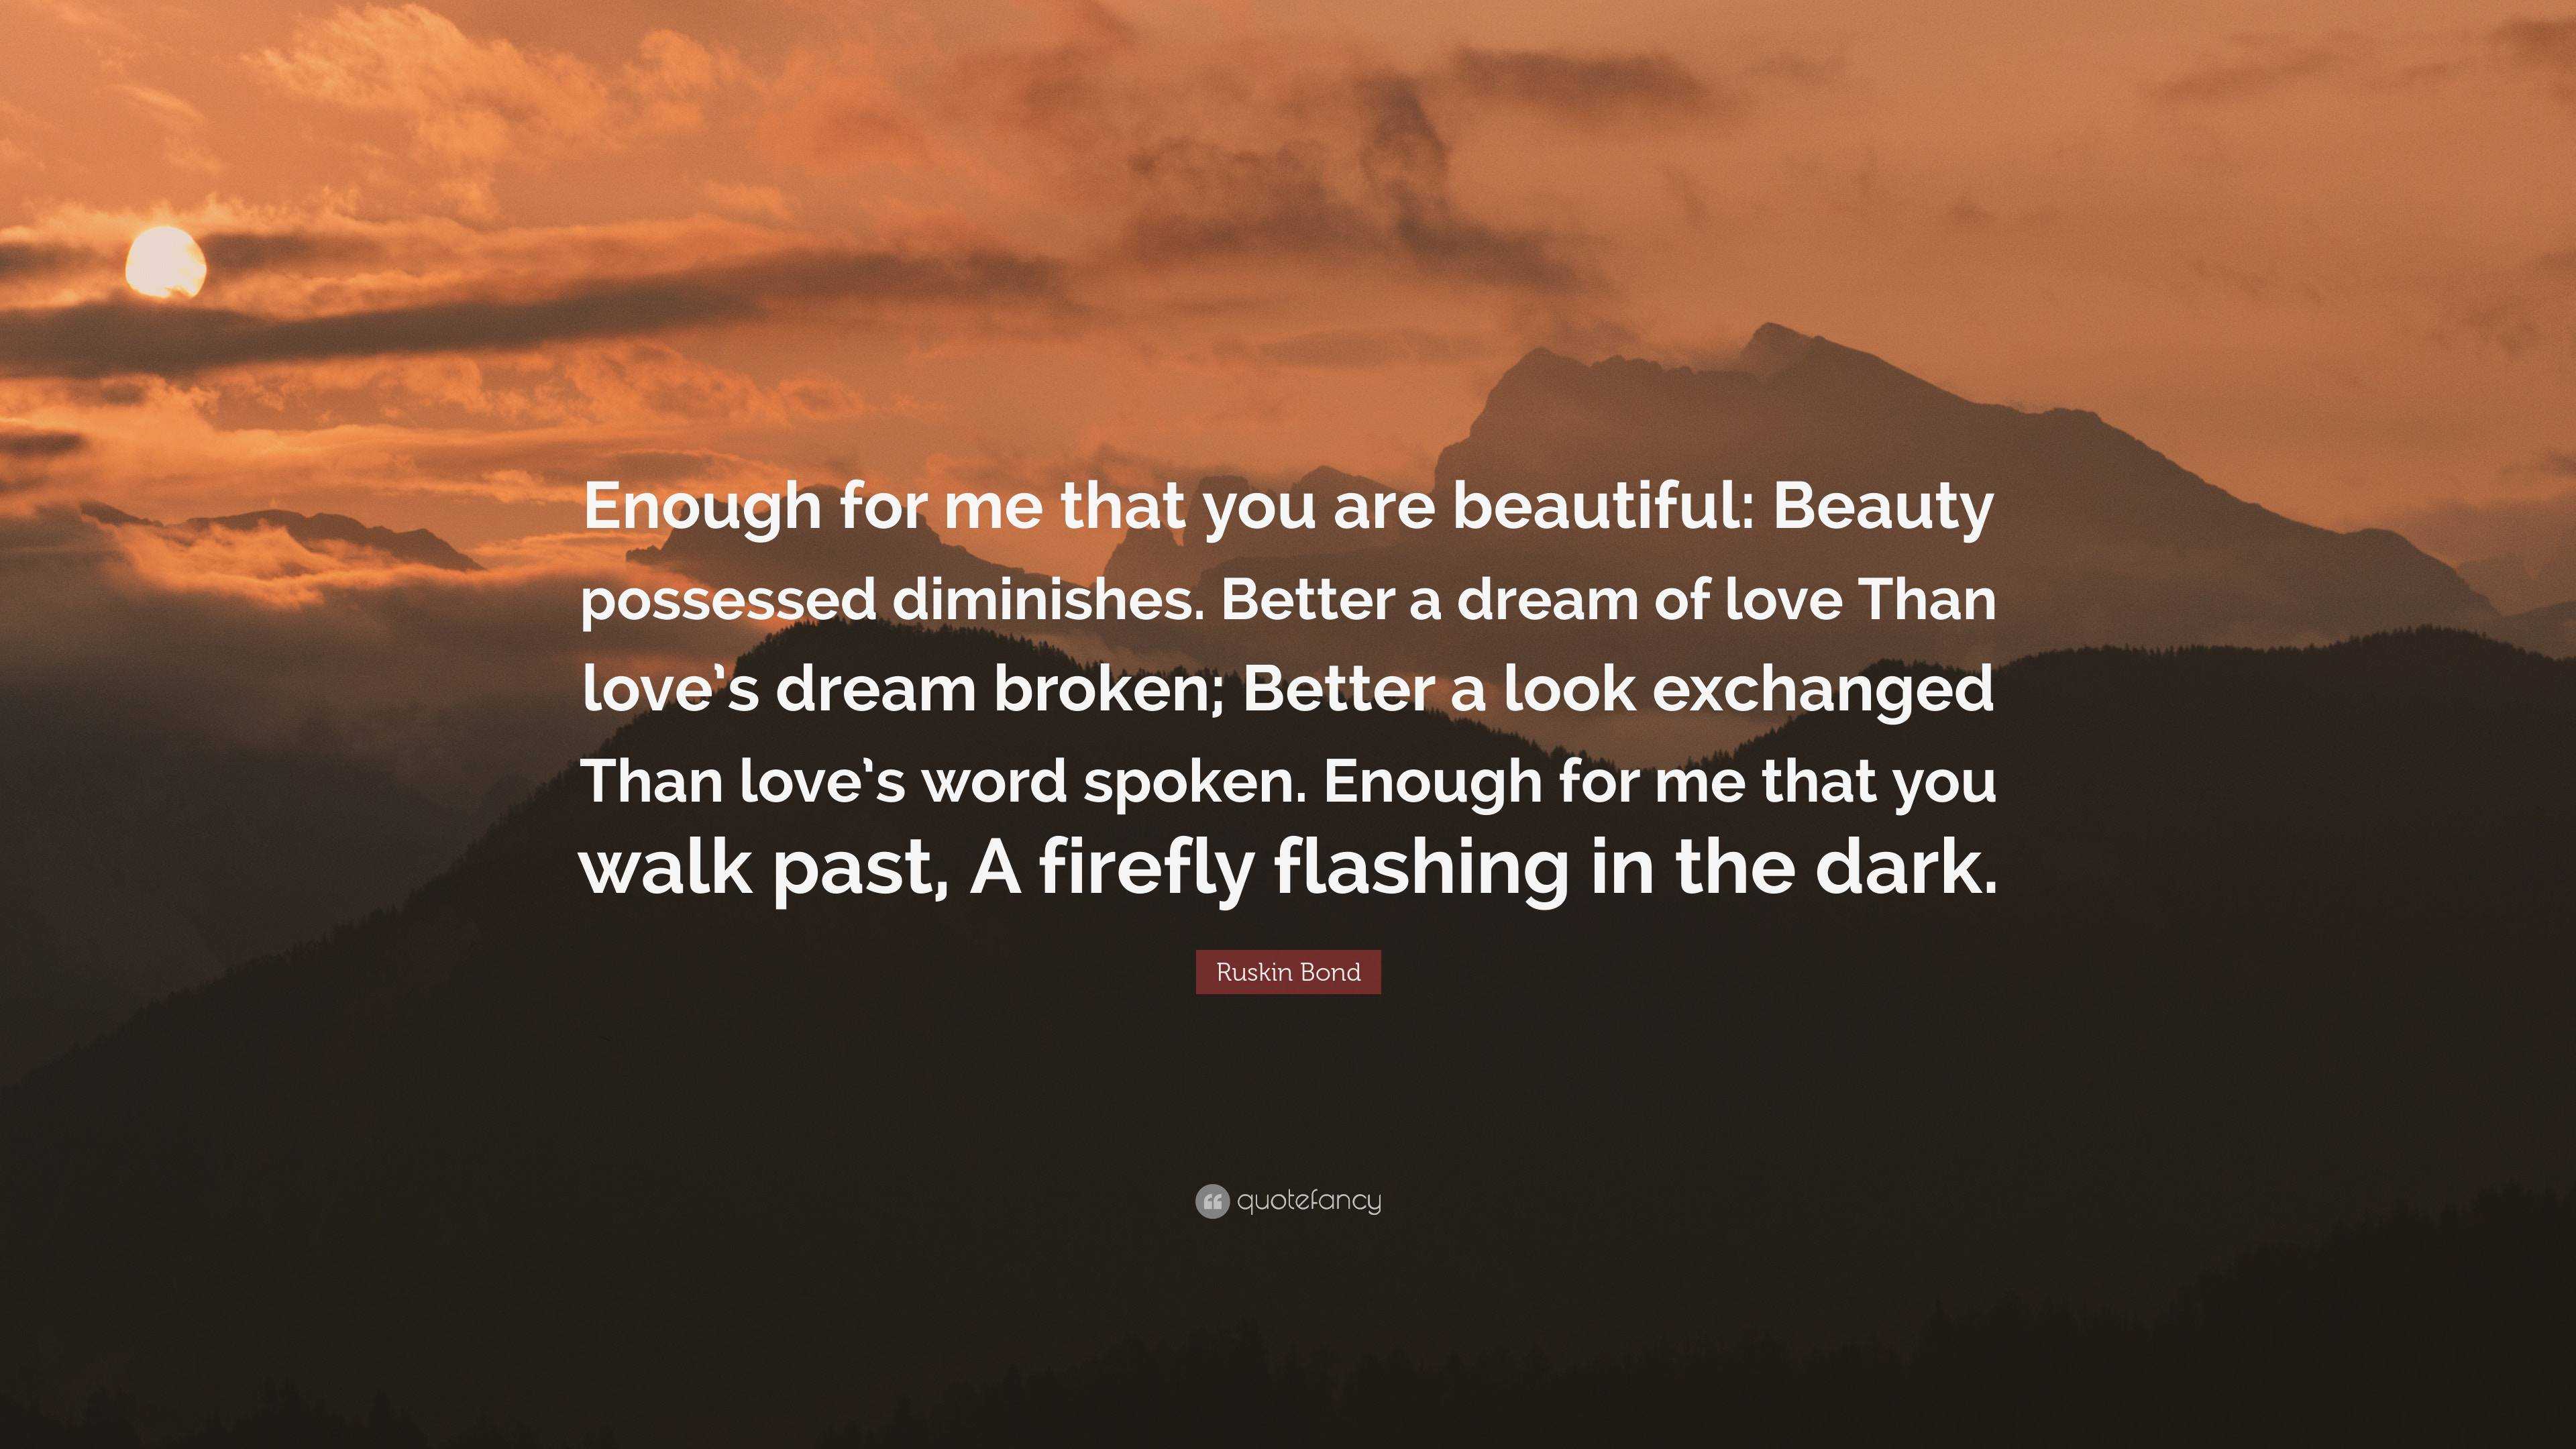 Ruskin Bond Quote: “Enough for me that you are beautiful: Beauty possessed  diminishes. Better a dream of love Than love's dream broken; Bett...”